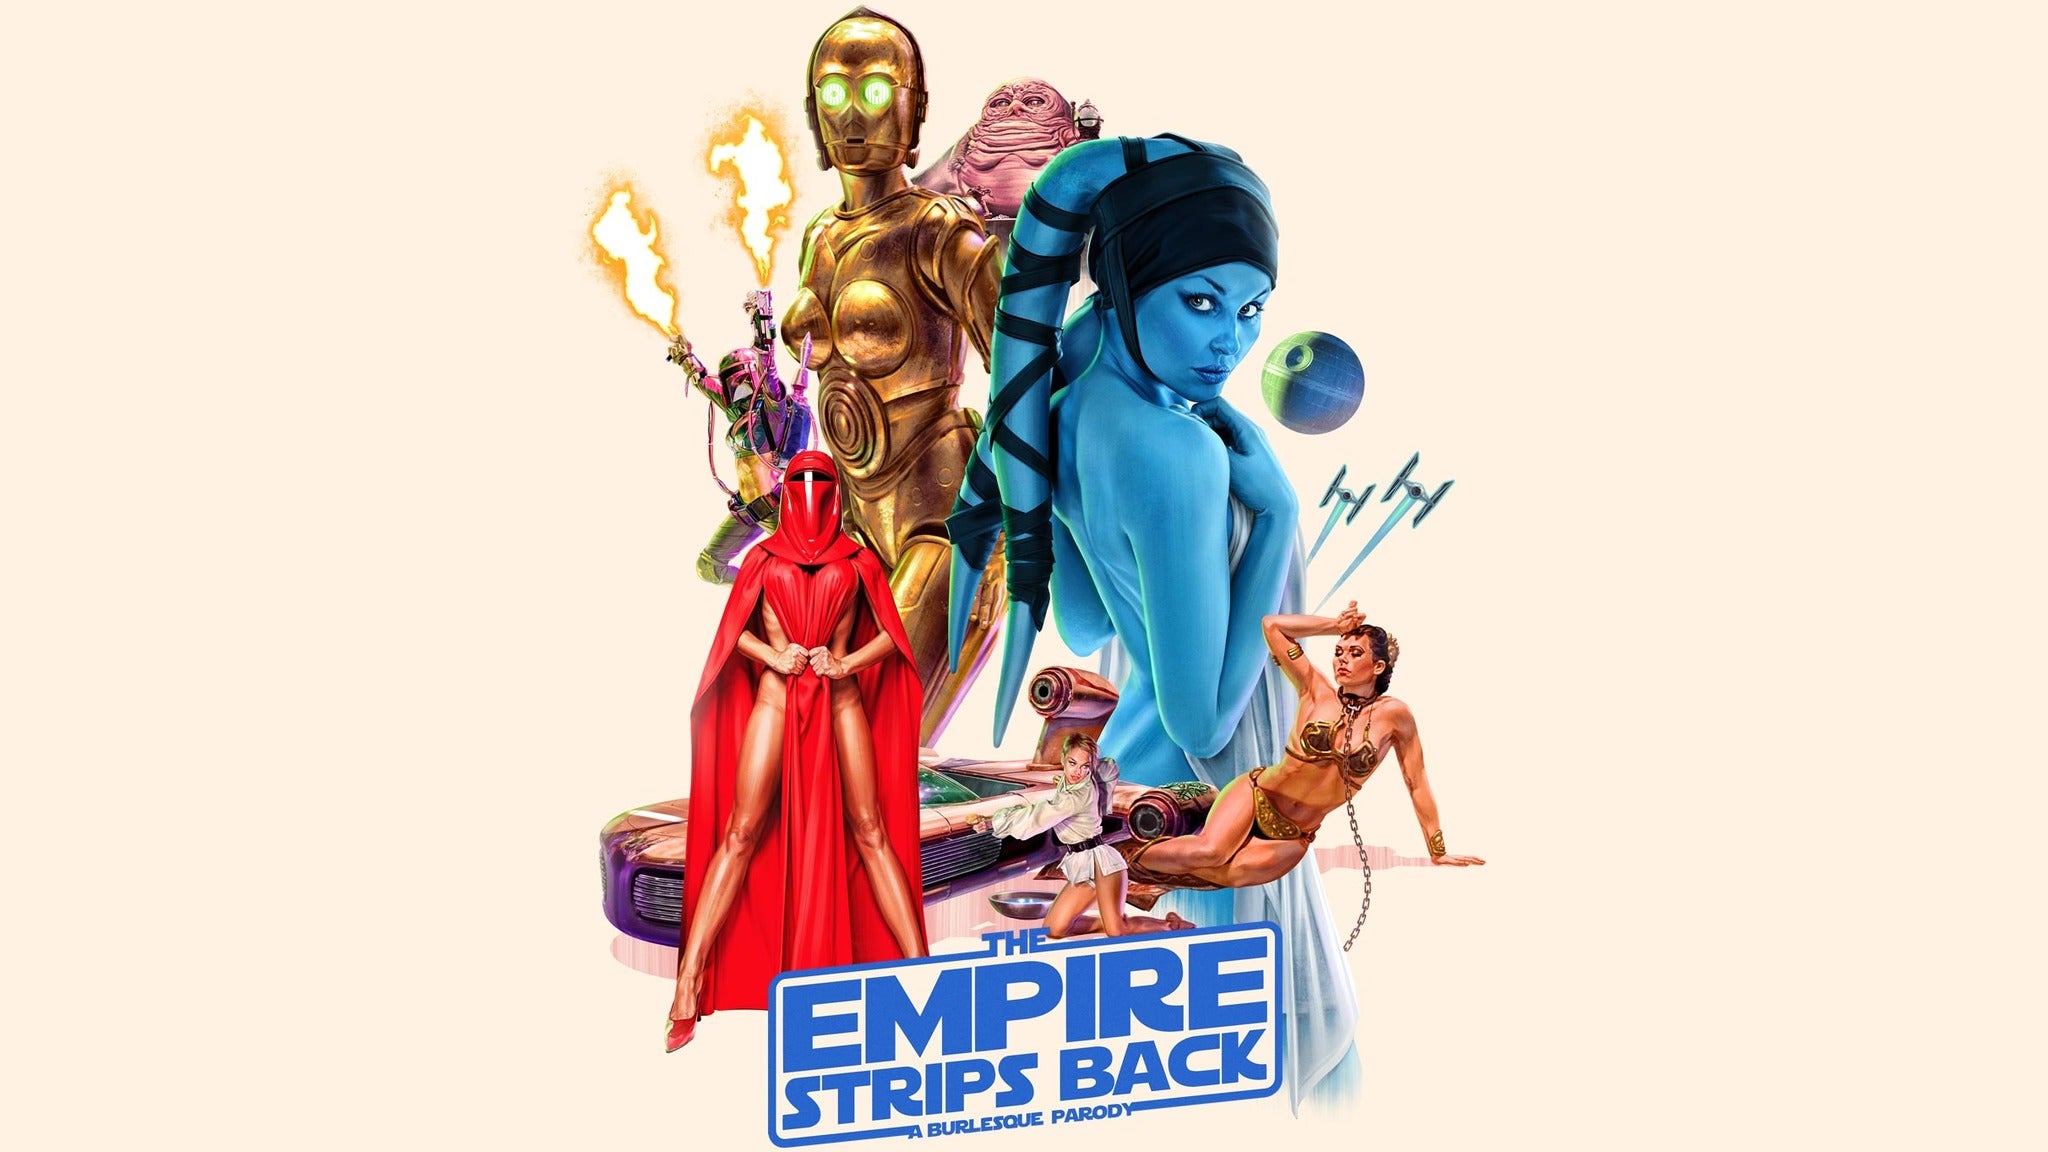 The Empire Strips Back: A Burlesque Parody in Phoenix promo photo for Artist VIP presale offer code